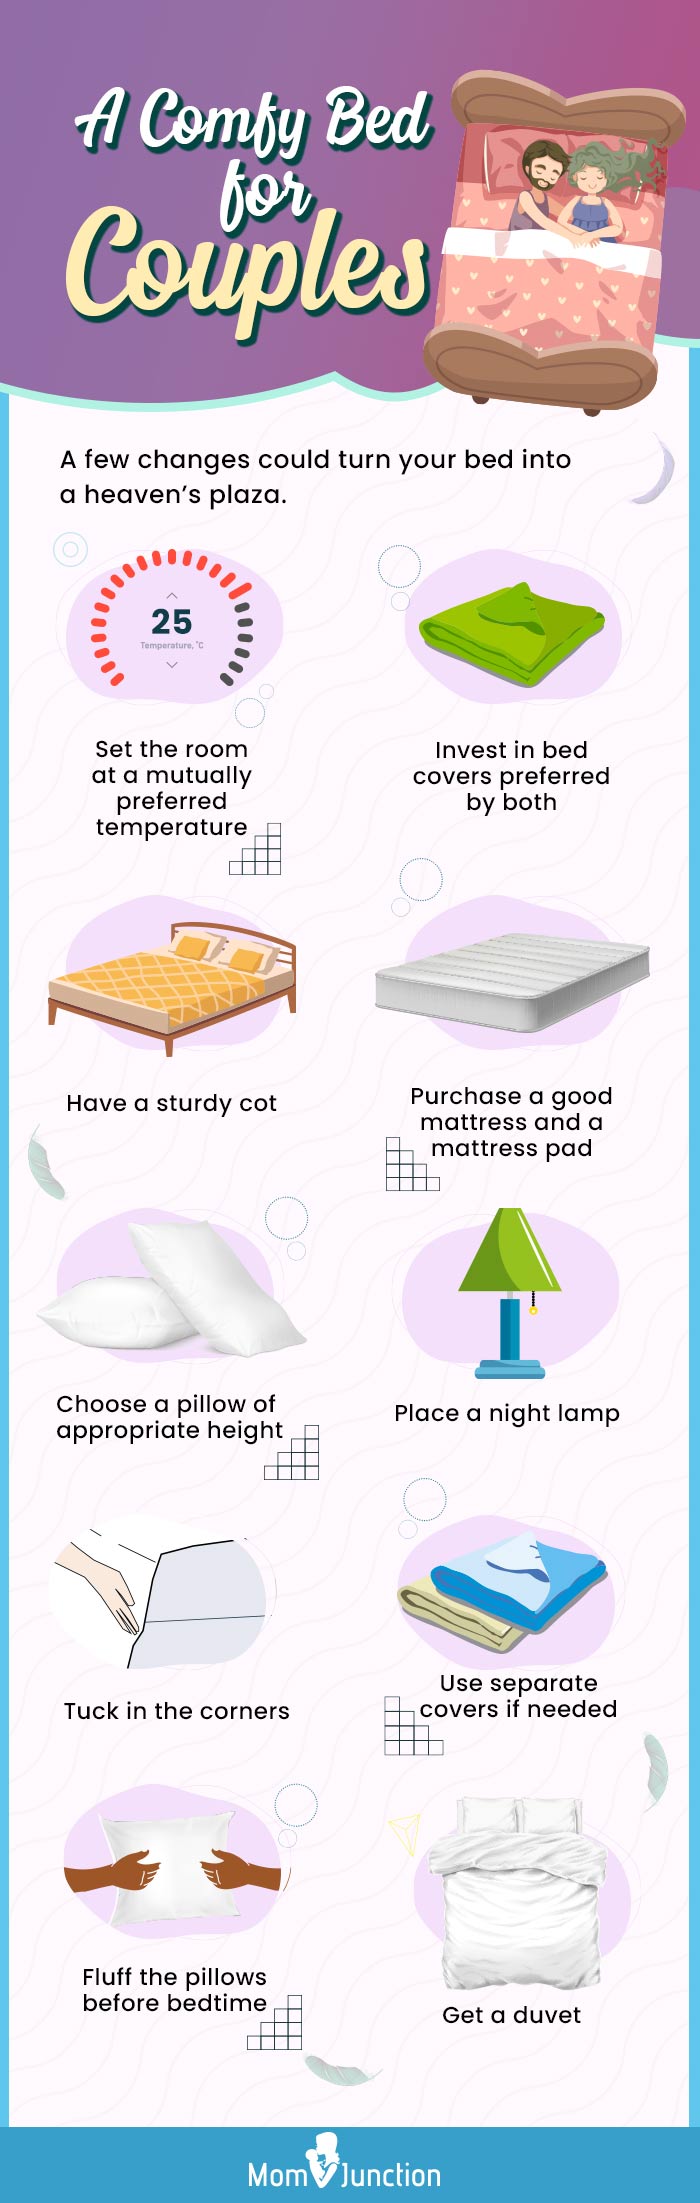 a comfy bed for couples (infographic)